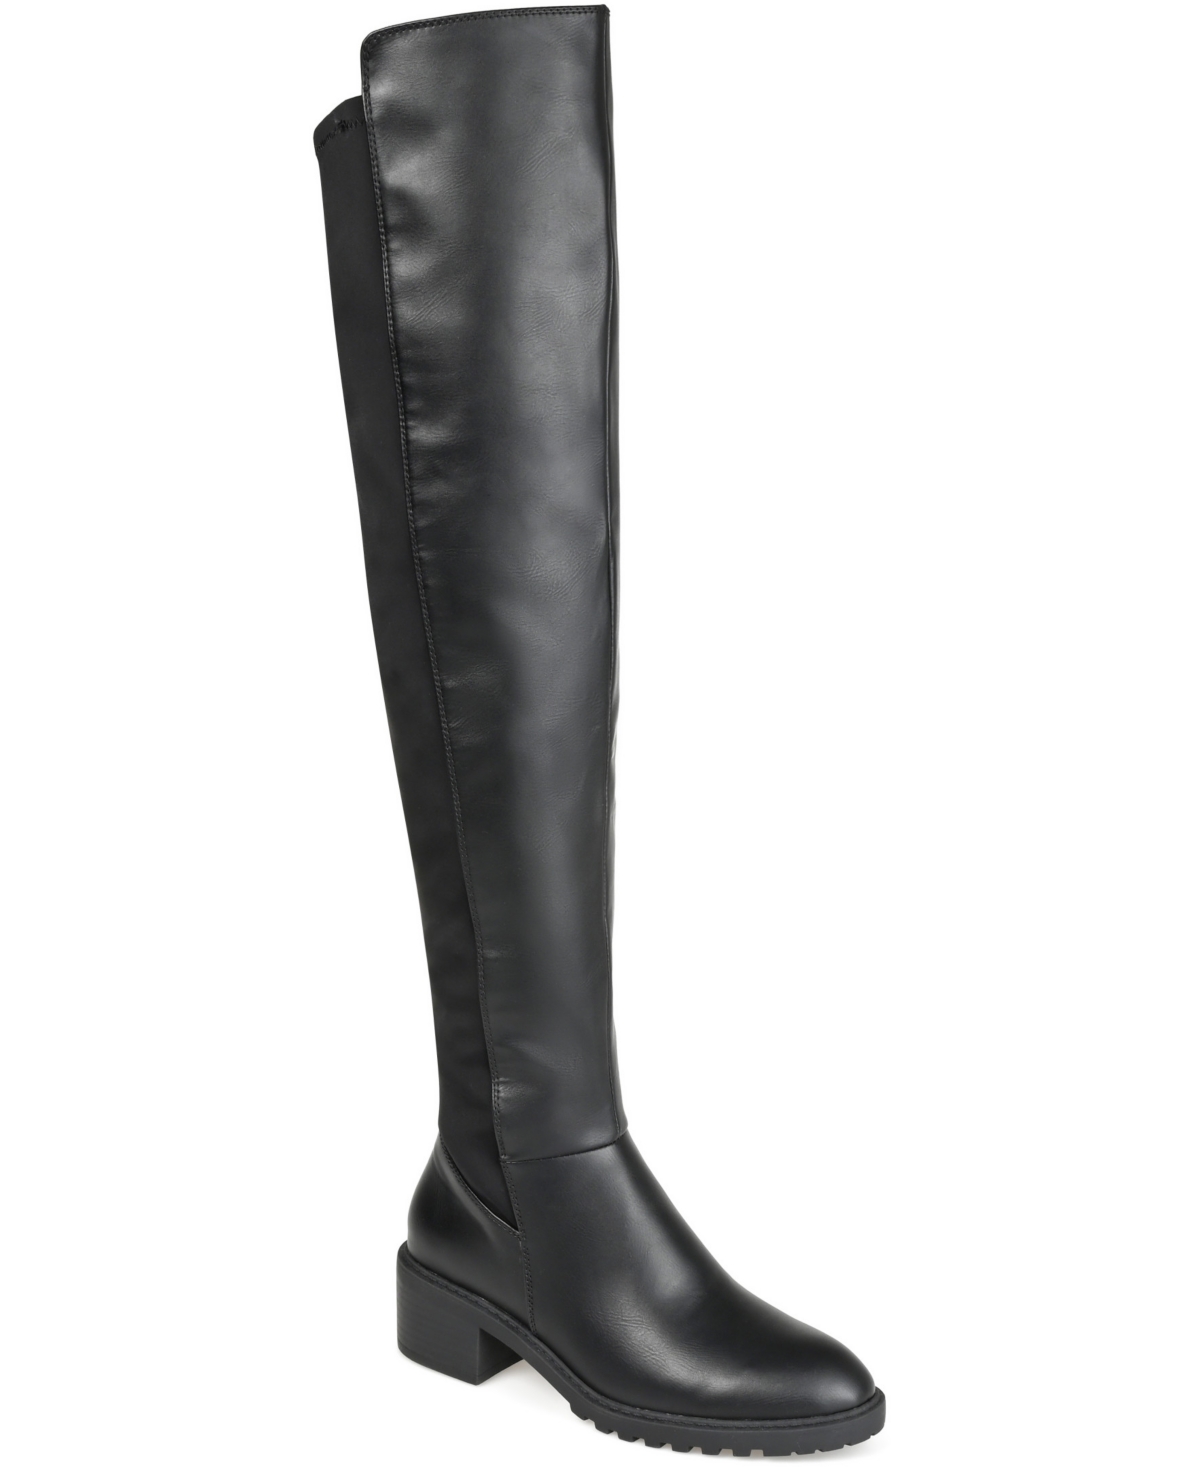 Vintage Shoes, Vintage Style Shoes Journee Collection Womens Aryia Boots - Black $65.99 AT vintagedancer.com